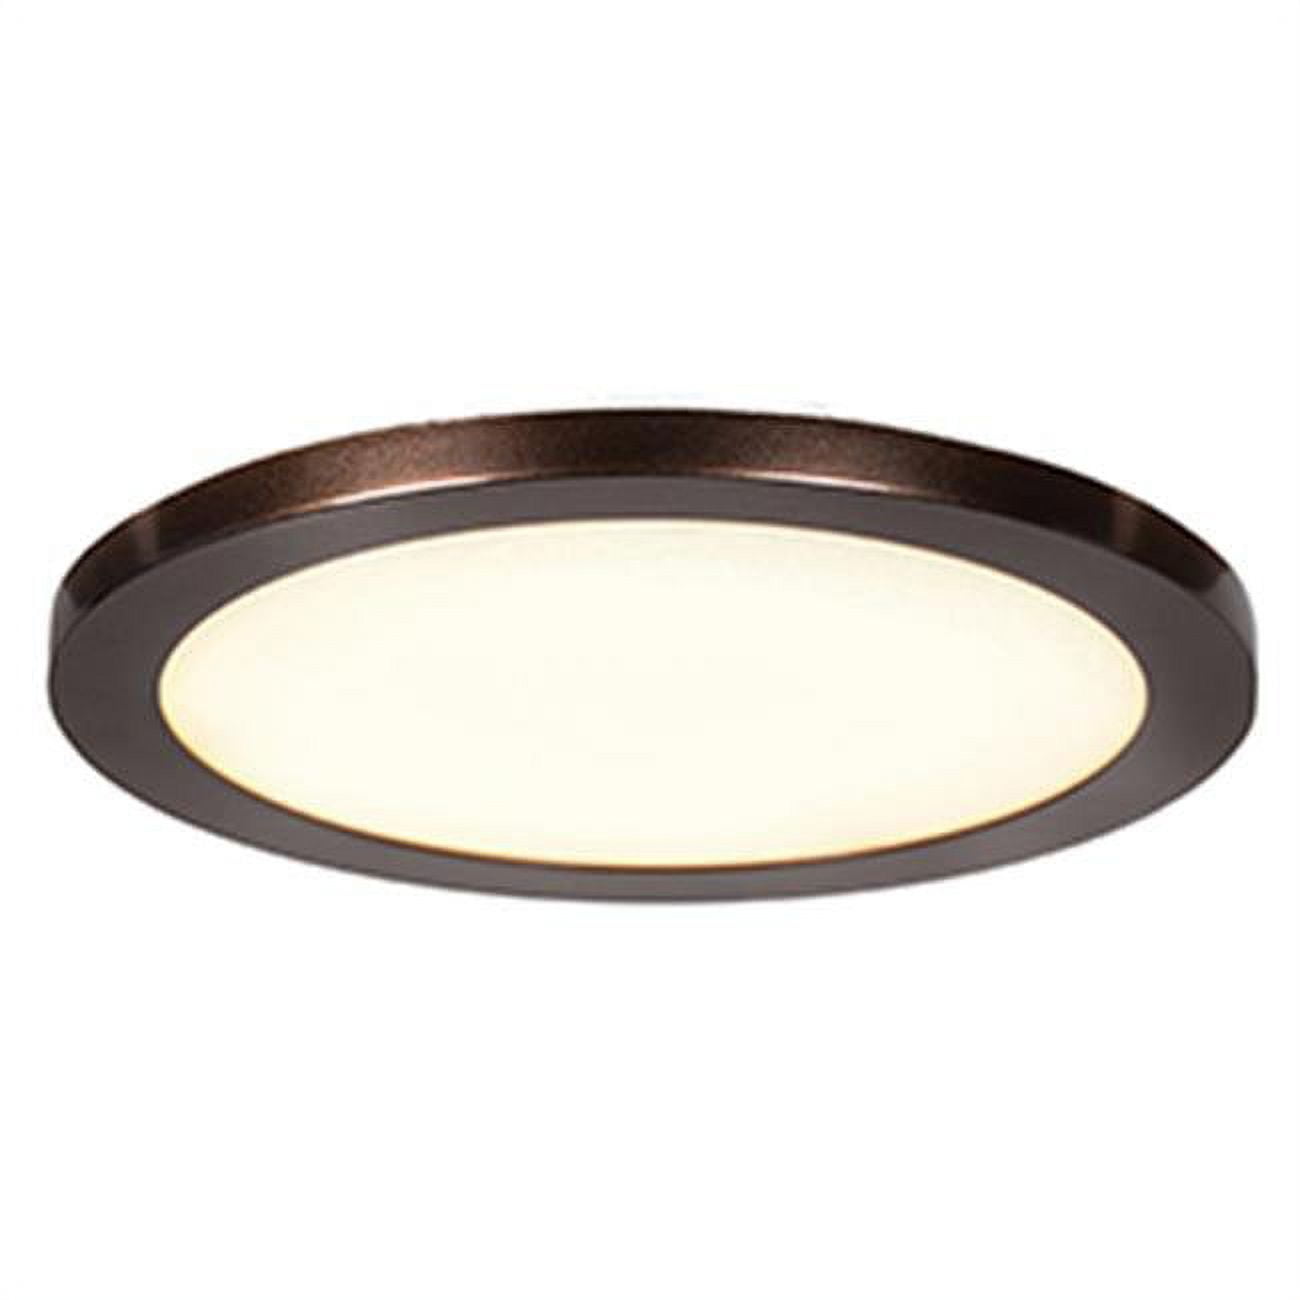 20811ledd-bs-acr 0.5 X 7.5 In. Disc Led Round Flush Mount, Brushed Steel & Acrylic Lens